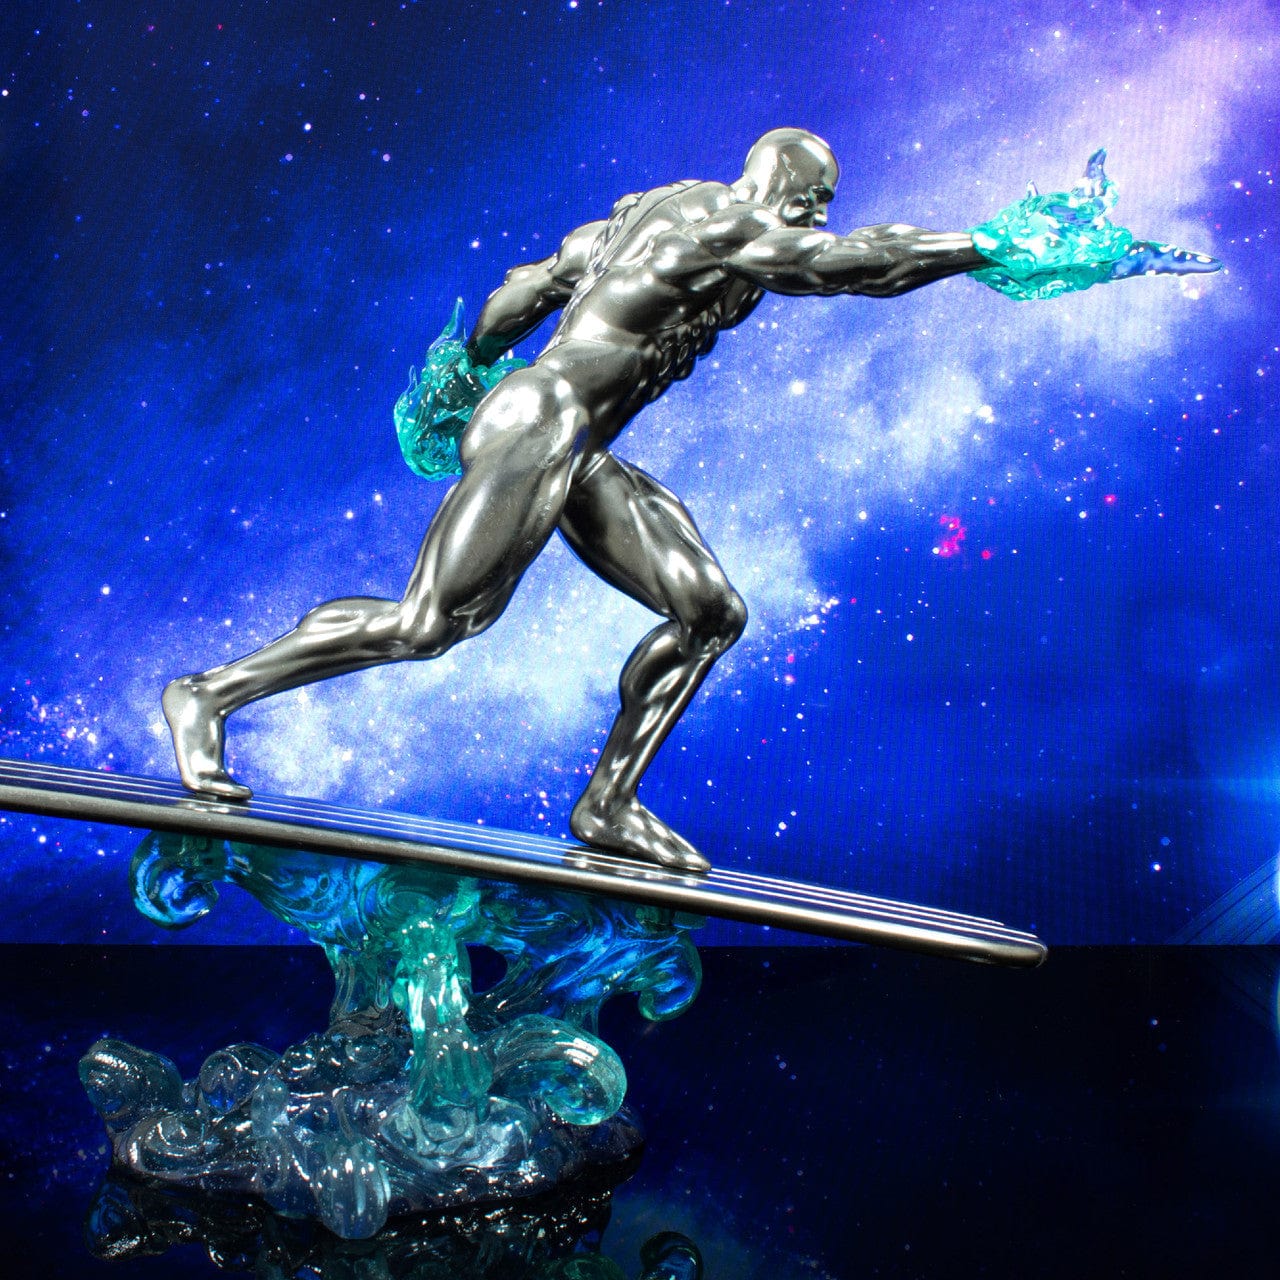 Diamond Select Toys Marvel Gallery Silver Surfer Statue Diorama